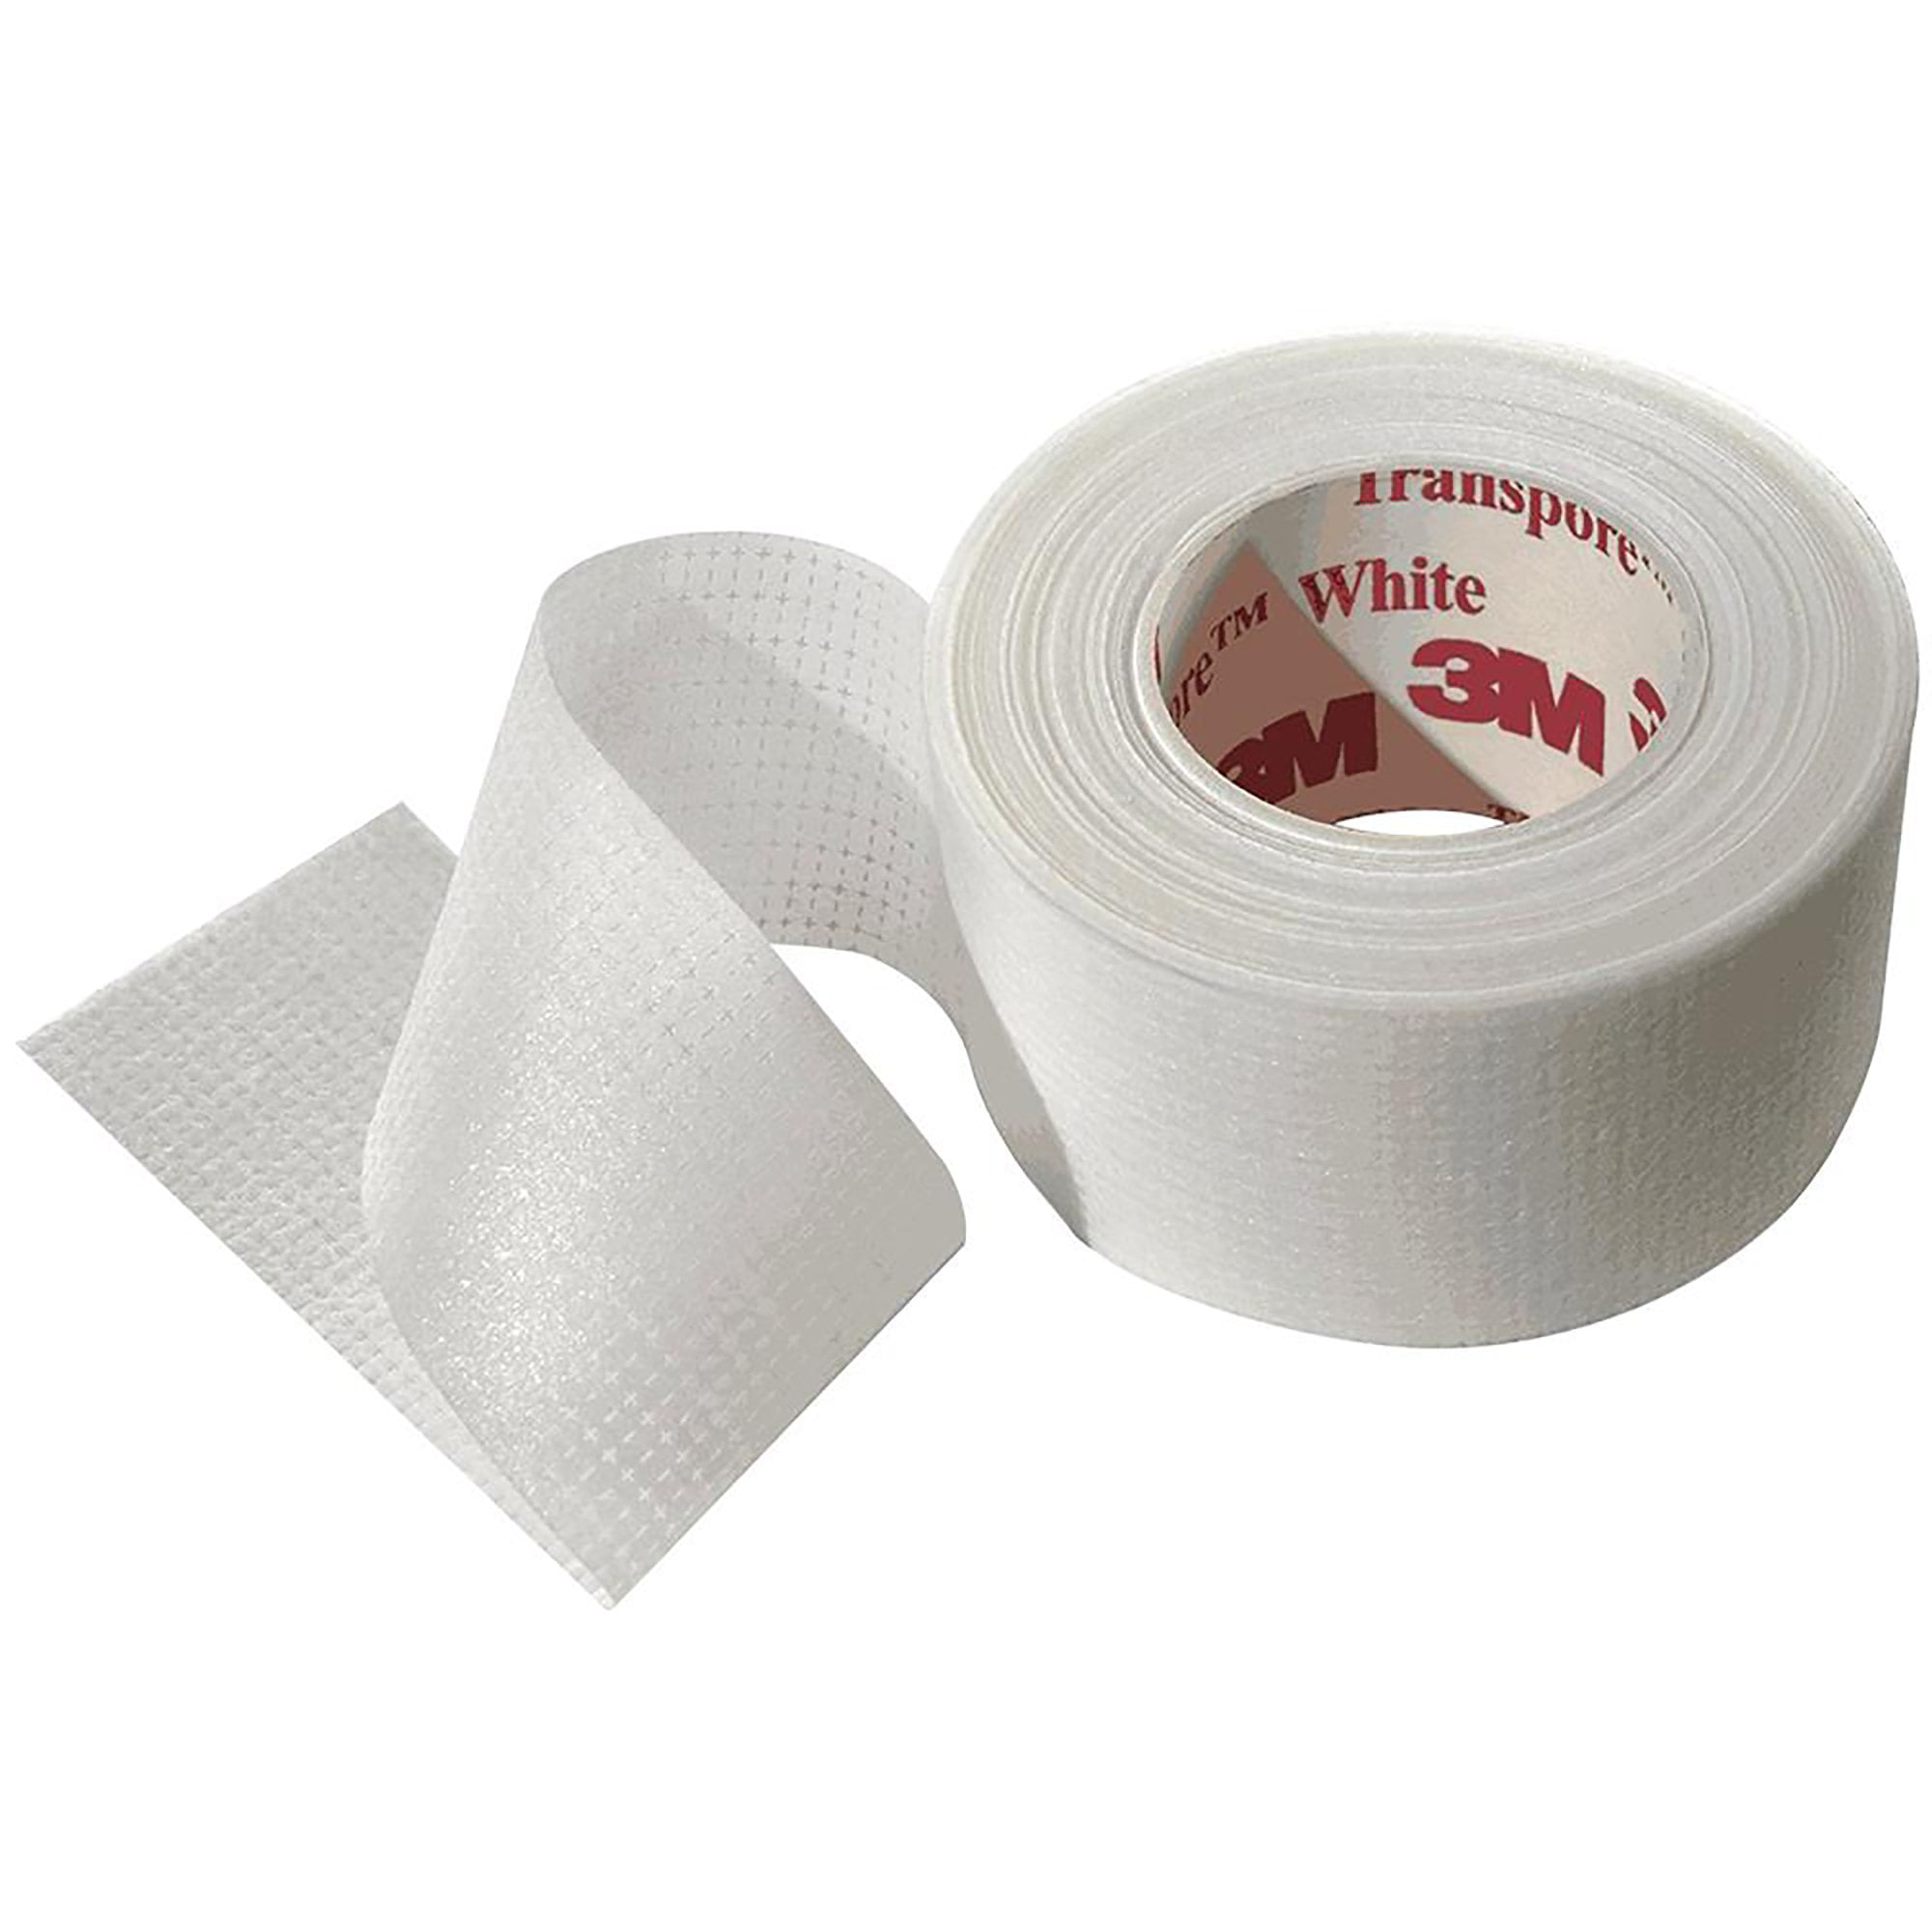 3M Microfoam Surgical Tape, Non-Sterile, Easy Tear Paper, White, 1 in x 10  yds, 12 Ct